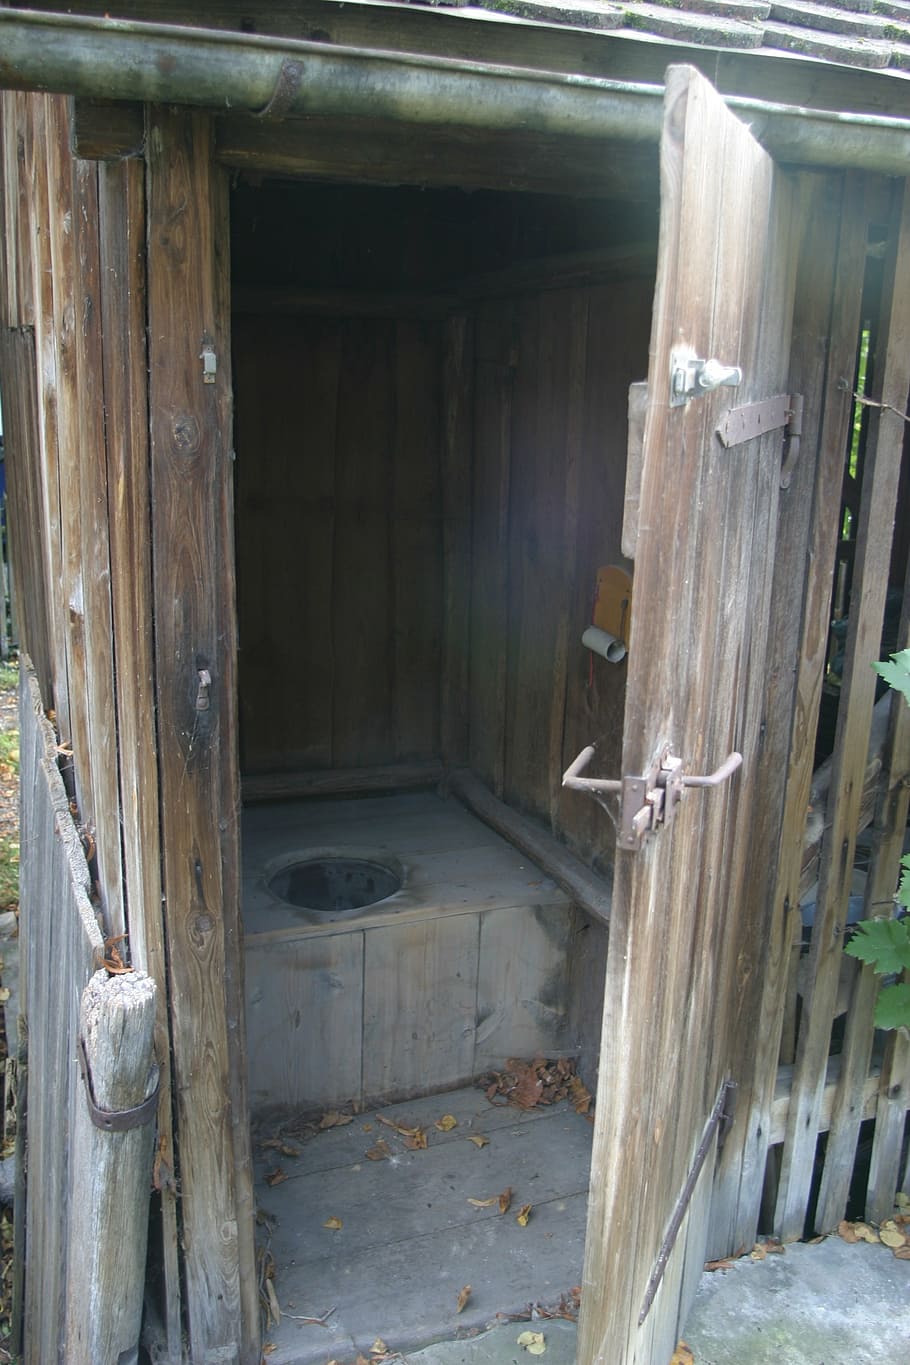 outhouse, loo, toilet, old toilet, plumpsklosett, historical toilet, wood, wood - material, architecture, entrance